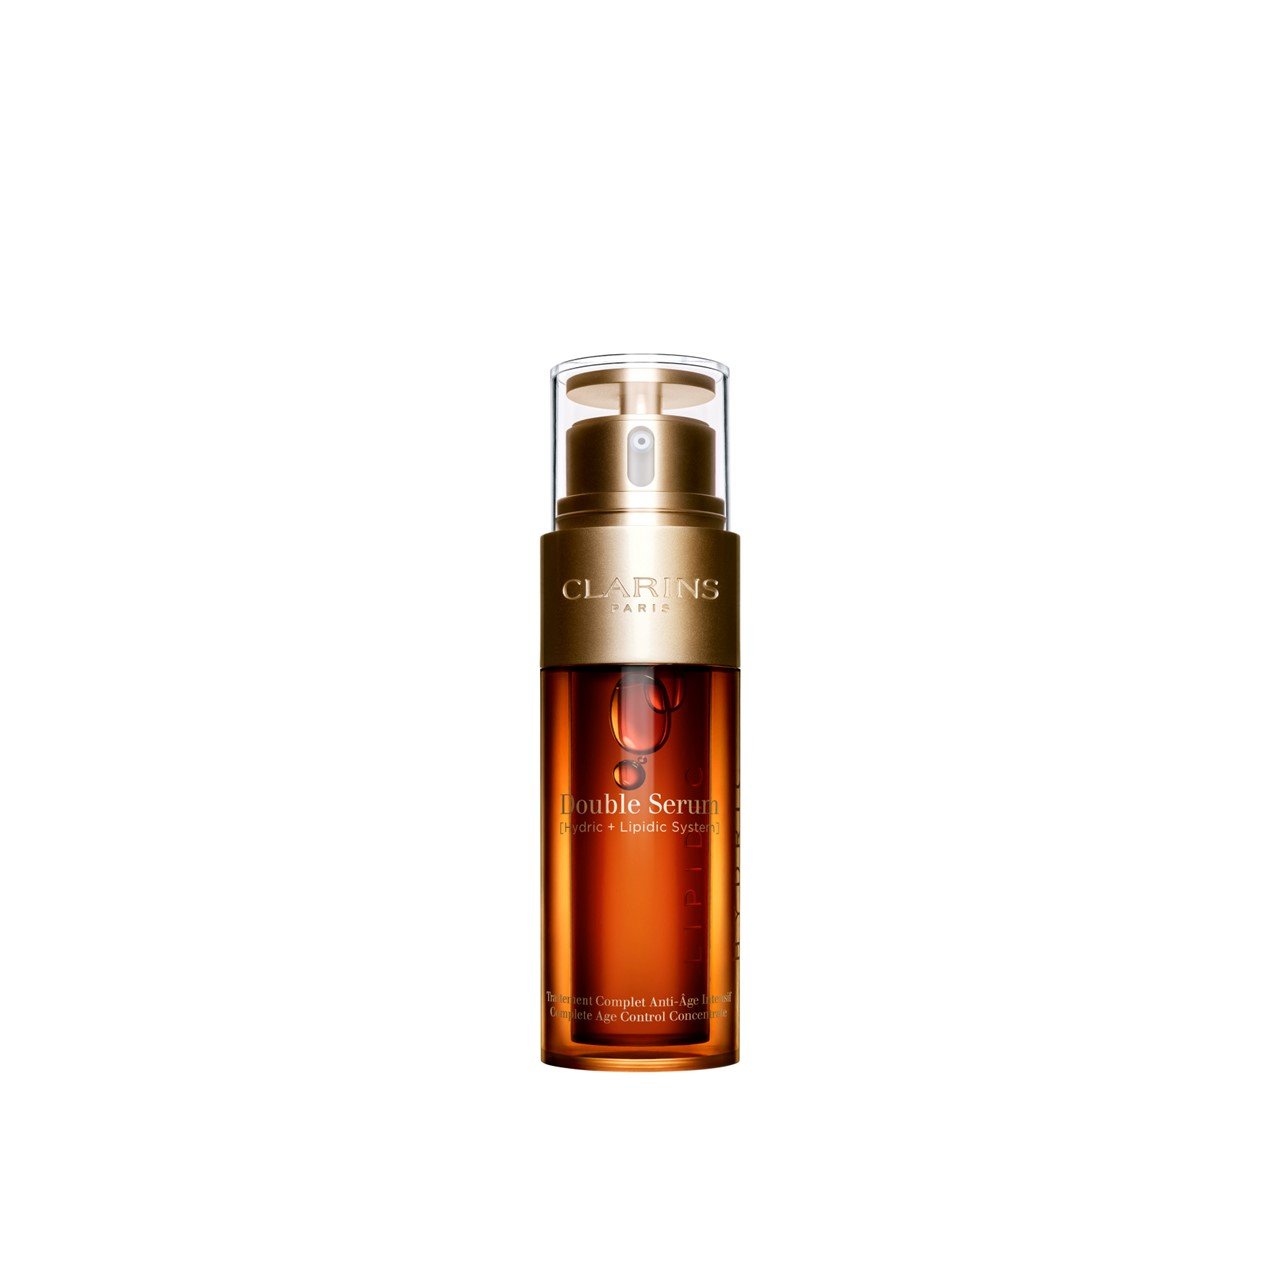 Best Clarins products: Clarins Double Serum